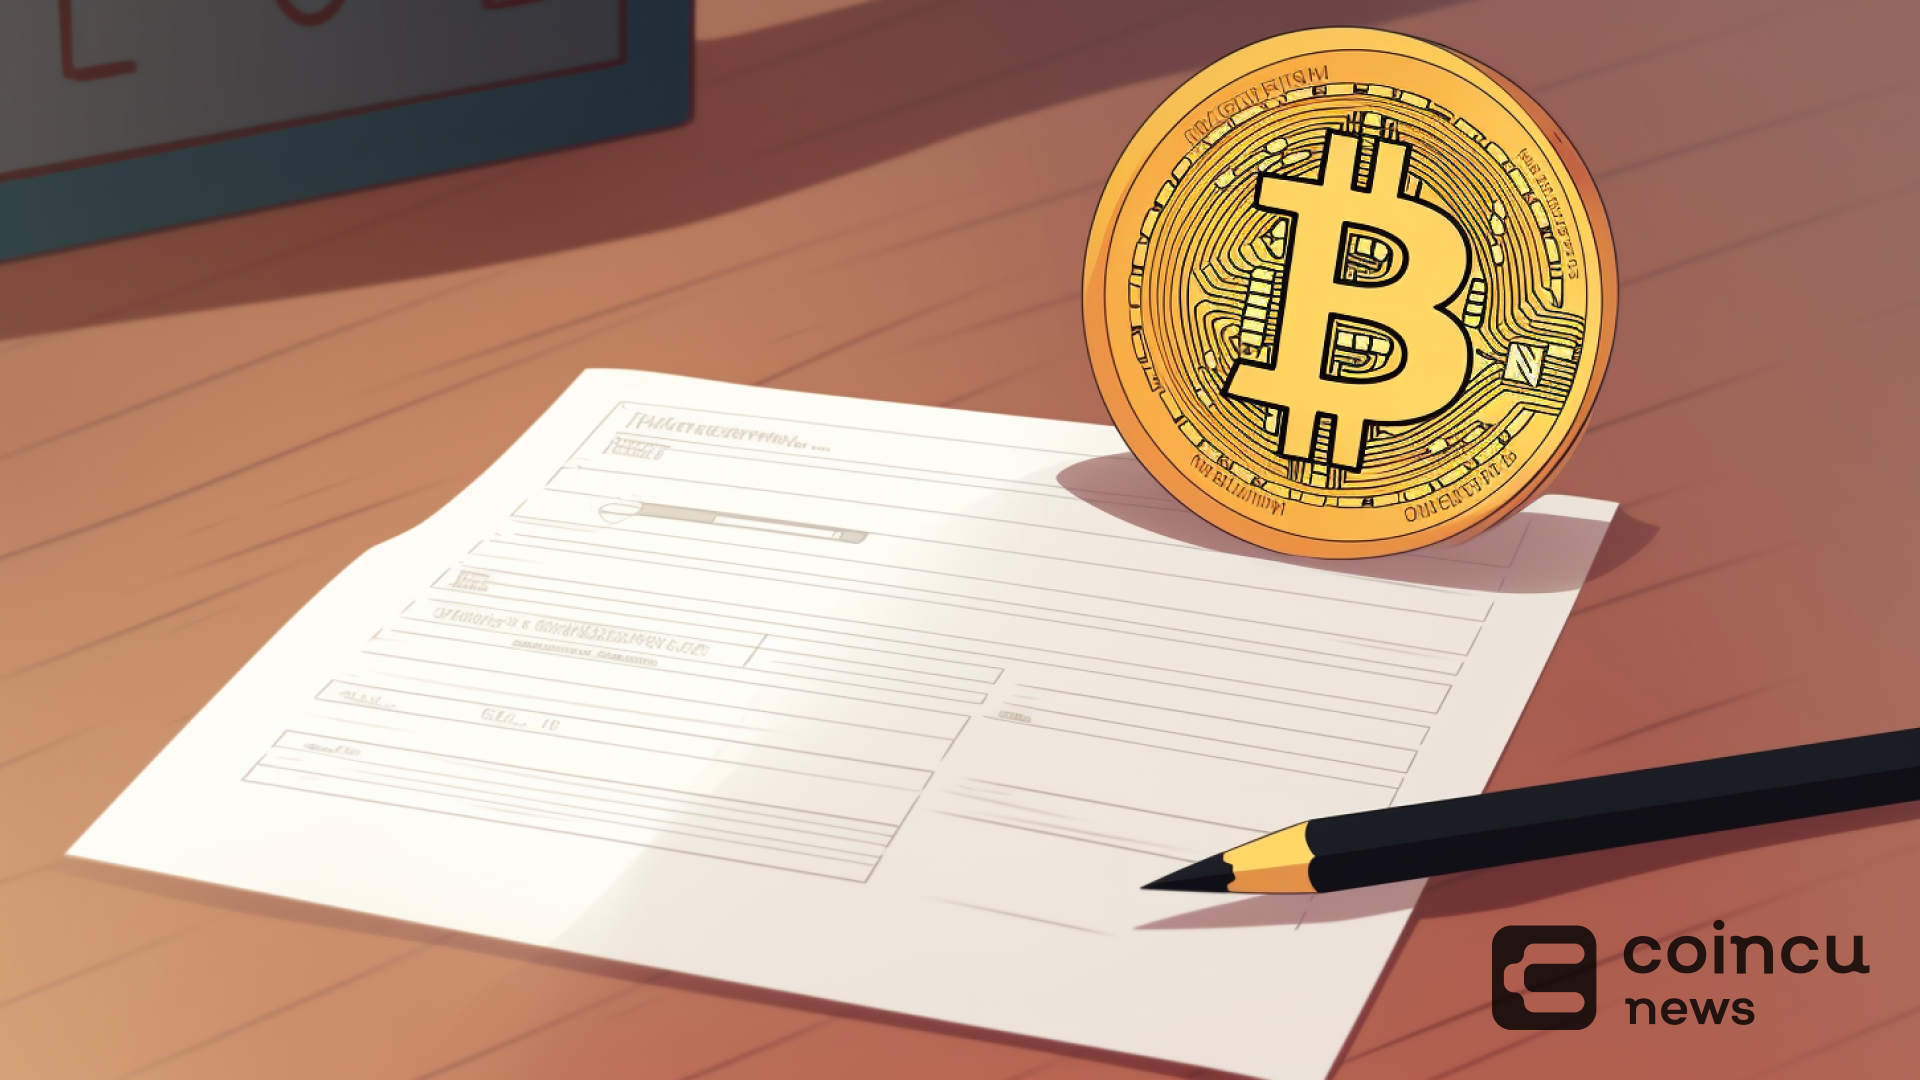 Spot Bitcoin ETF Filings Must Be Revised According To New Requirements By Dec 29